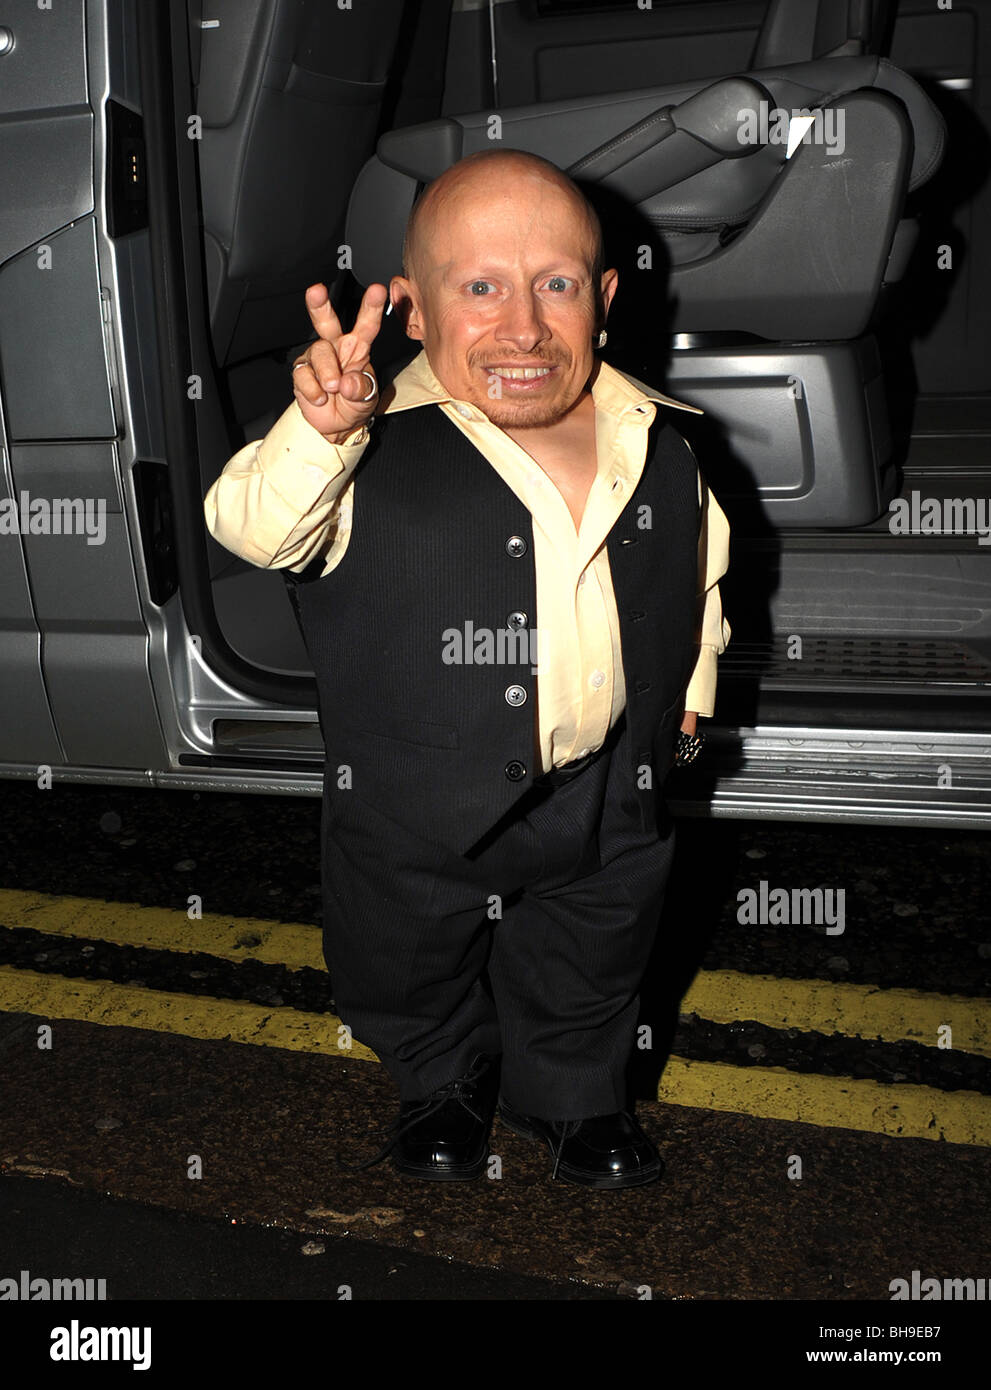 Hollywood Actor Verne Troyer also Known as Mini Me outside Whiskey Mist night club London, UK. Stock Photo